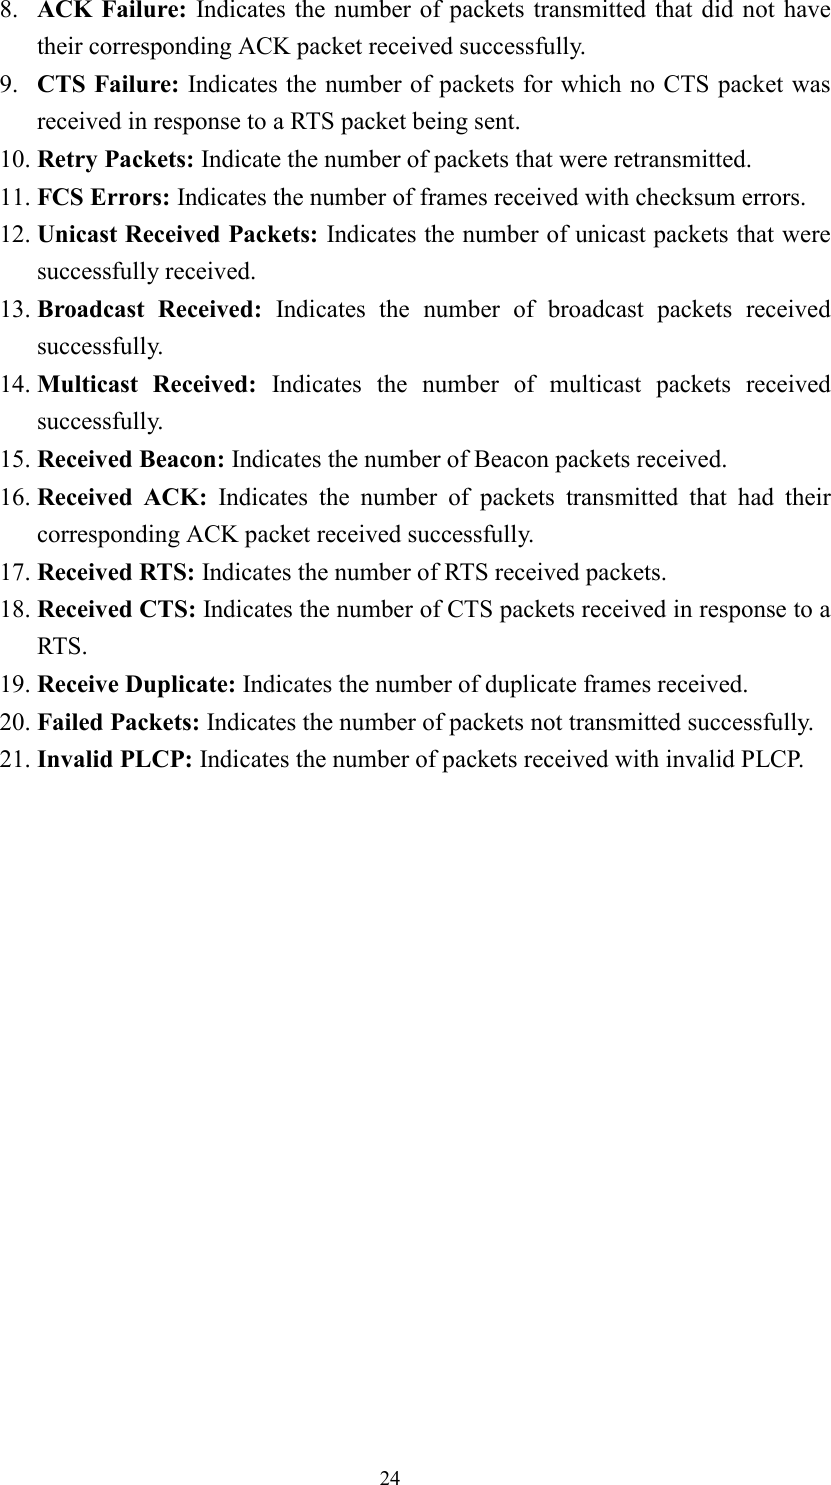 248. ACK Failure: Indicates the number of packets transmitted that did not havetheir corresponding ACK packet received successfully.9. CTS Failure: Indicates the number of packets for which no CTS packet wasreceived in response to a RTS packet being sent.10. Retry Packets: Indicate the number of packets that were retransmitted.11. FCS Errors: Indicates the number of frames received with checksum errors.12. Unicast Received Packets: Indicates the number of unicast packets that weresuccessfully received.13. Broadcast Received: Indicates the number of broadcast packets receivedsuccessfully.14. Multicast Received: Indicates the number of multicast packets receivedsuccessfully.15. Received Beacon: Indicates the number of Beacon packets received.16. Received ACK: Indicates the number of packets transmitted that had theircorresponding ACK packet received successfully.17. Received RTS: Indicates the number of RTS received packets.18. Received CTS: Indicates the number of CTS packets received in response to aRTS.19. Receive Duplicate: Indicates the number of duplicate frames received.20. Failed Packets: Indicates the number of packets not transmitted successfully.21. Invalid PLCP: Indicates the number of packets received with invalid PLCP.